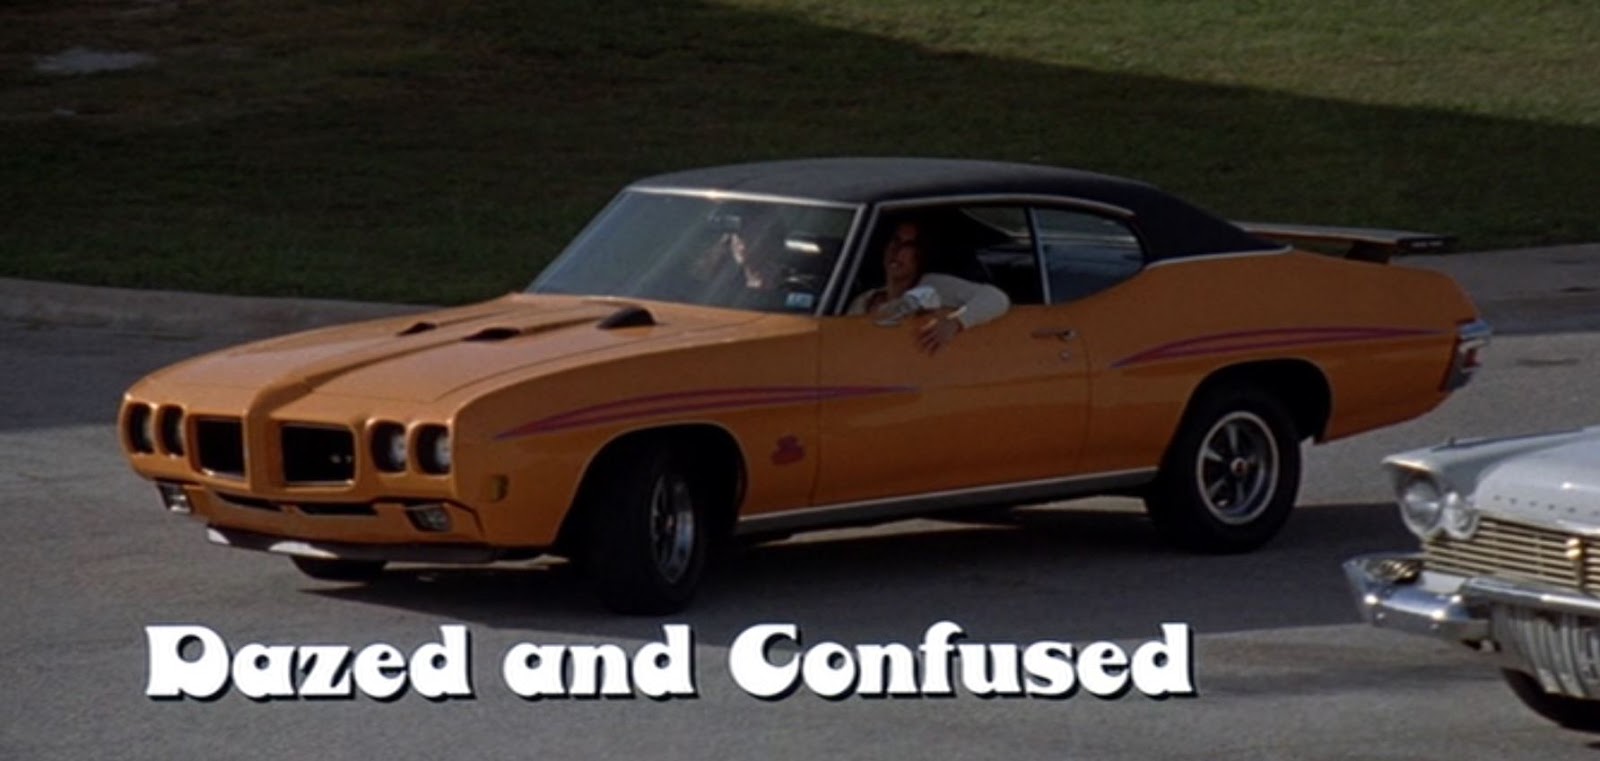 Just A Car Guy the cool cars in the movie Dazed and Confused, set in 1976, included a Superbird, GTO Judge, Chevelle, SD 455 Trans Am